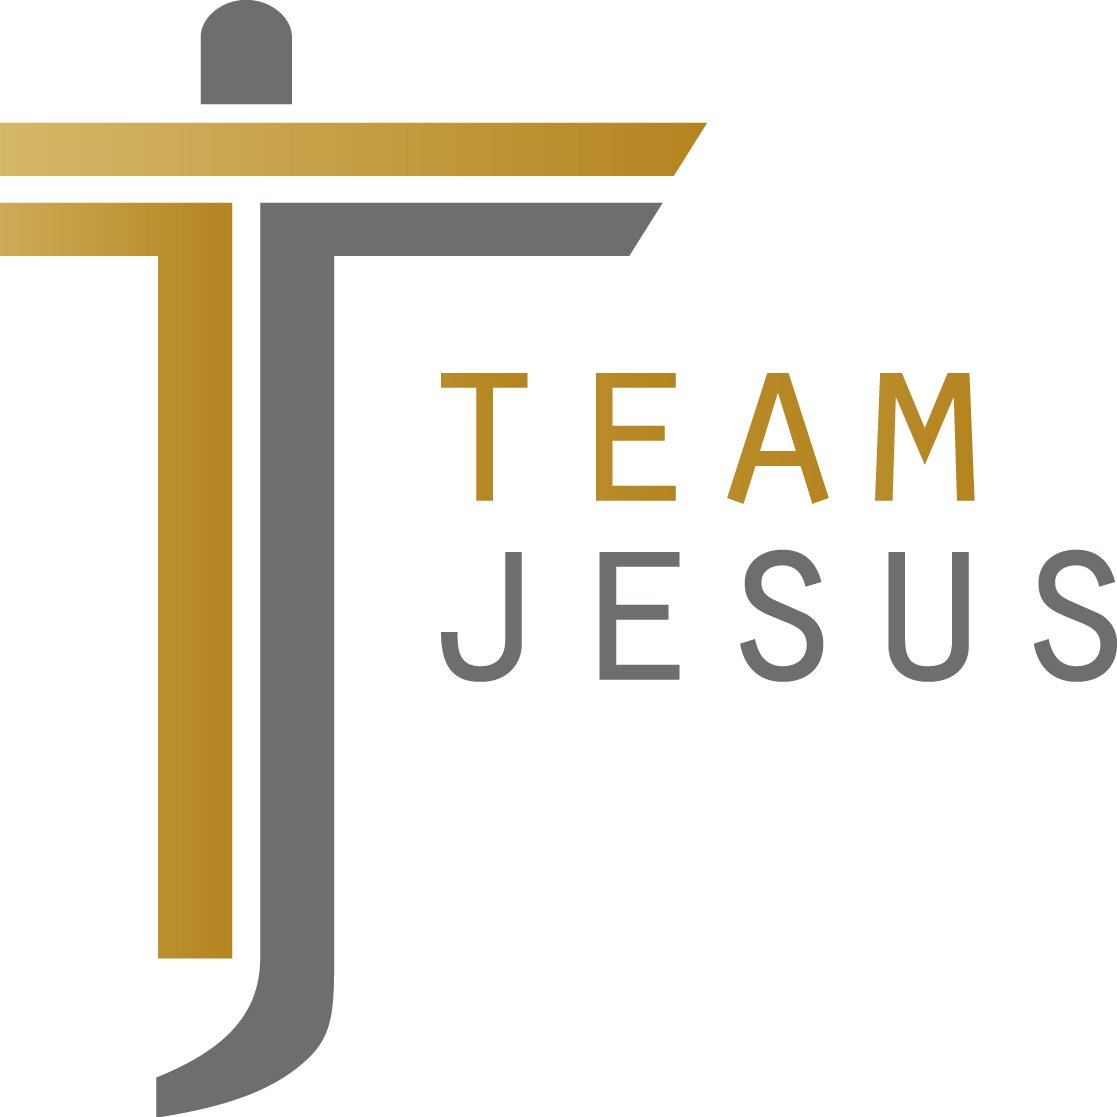 Team Jesus is team of people dedicated to bringing great board game experience and promote Jesus to everybody.